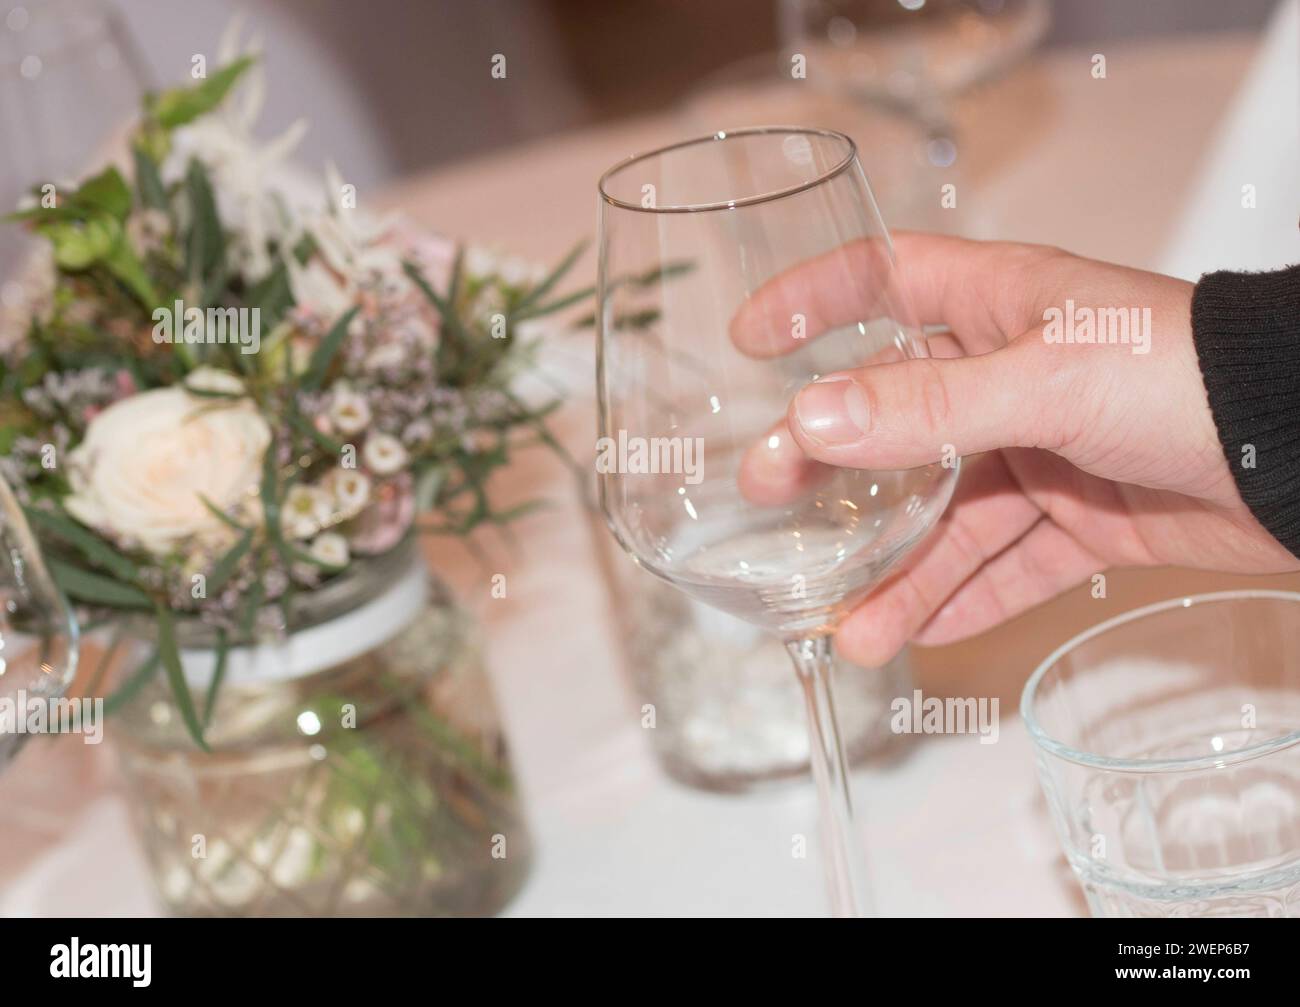 a wine glass for drinking, consumption of alcoholic beverages and enjoyment a wine glass for drinking Stock Photo